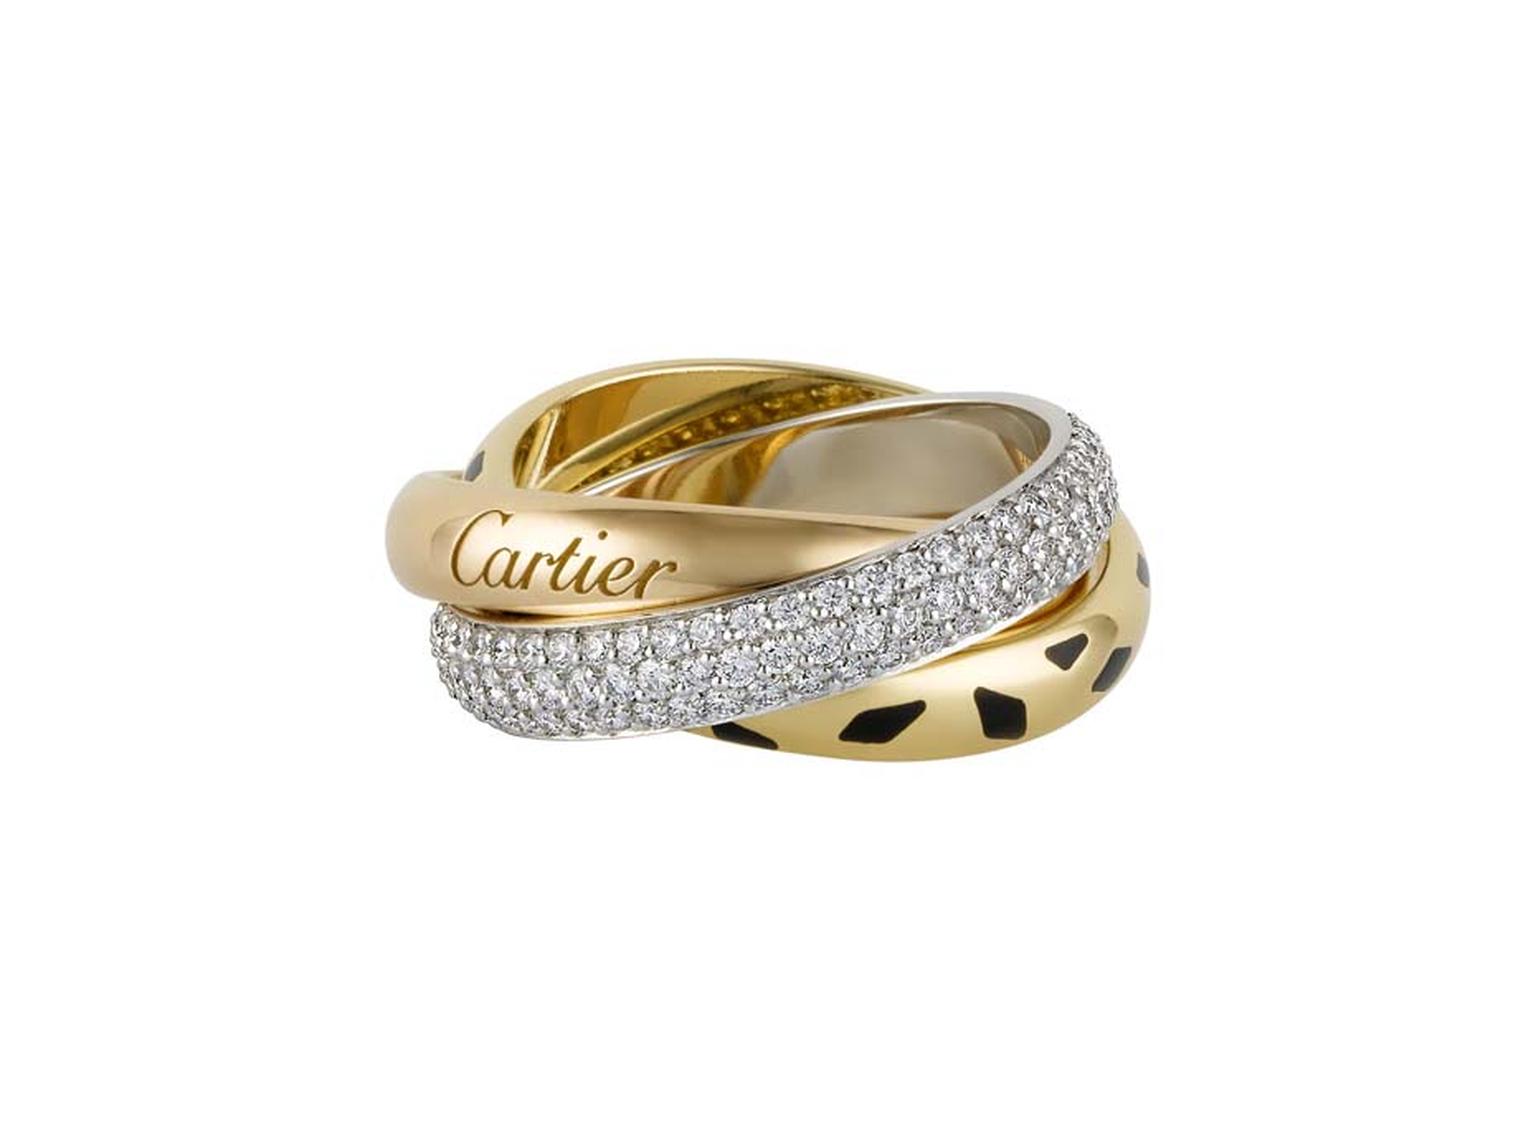 Cartier Trinity Sauvage ring featuring a white gold band pavéd with diamonds, a yellow gold band with black lacquer spots and a pink gold band engraved with Cartier.